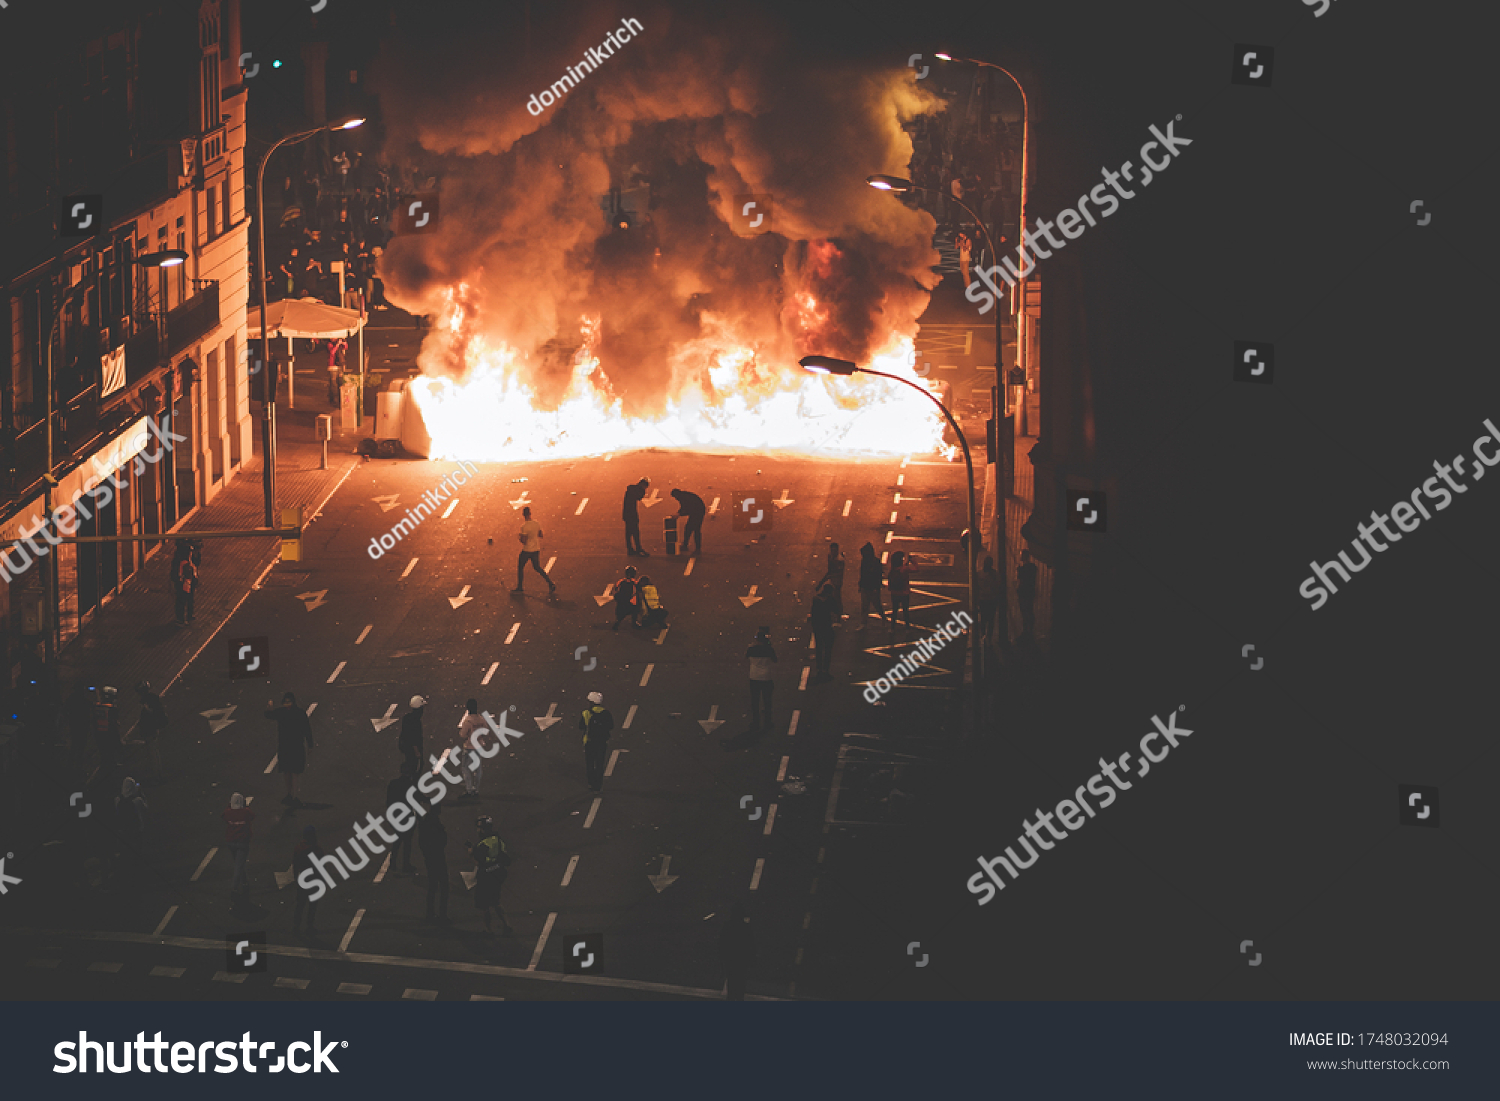 Street in flames with protestants #1748032094